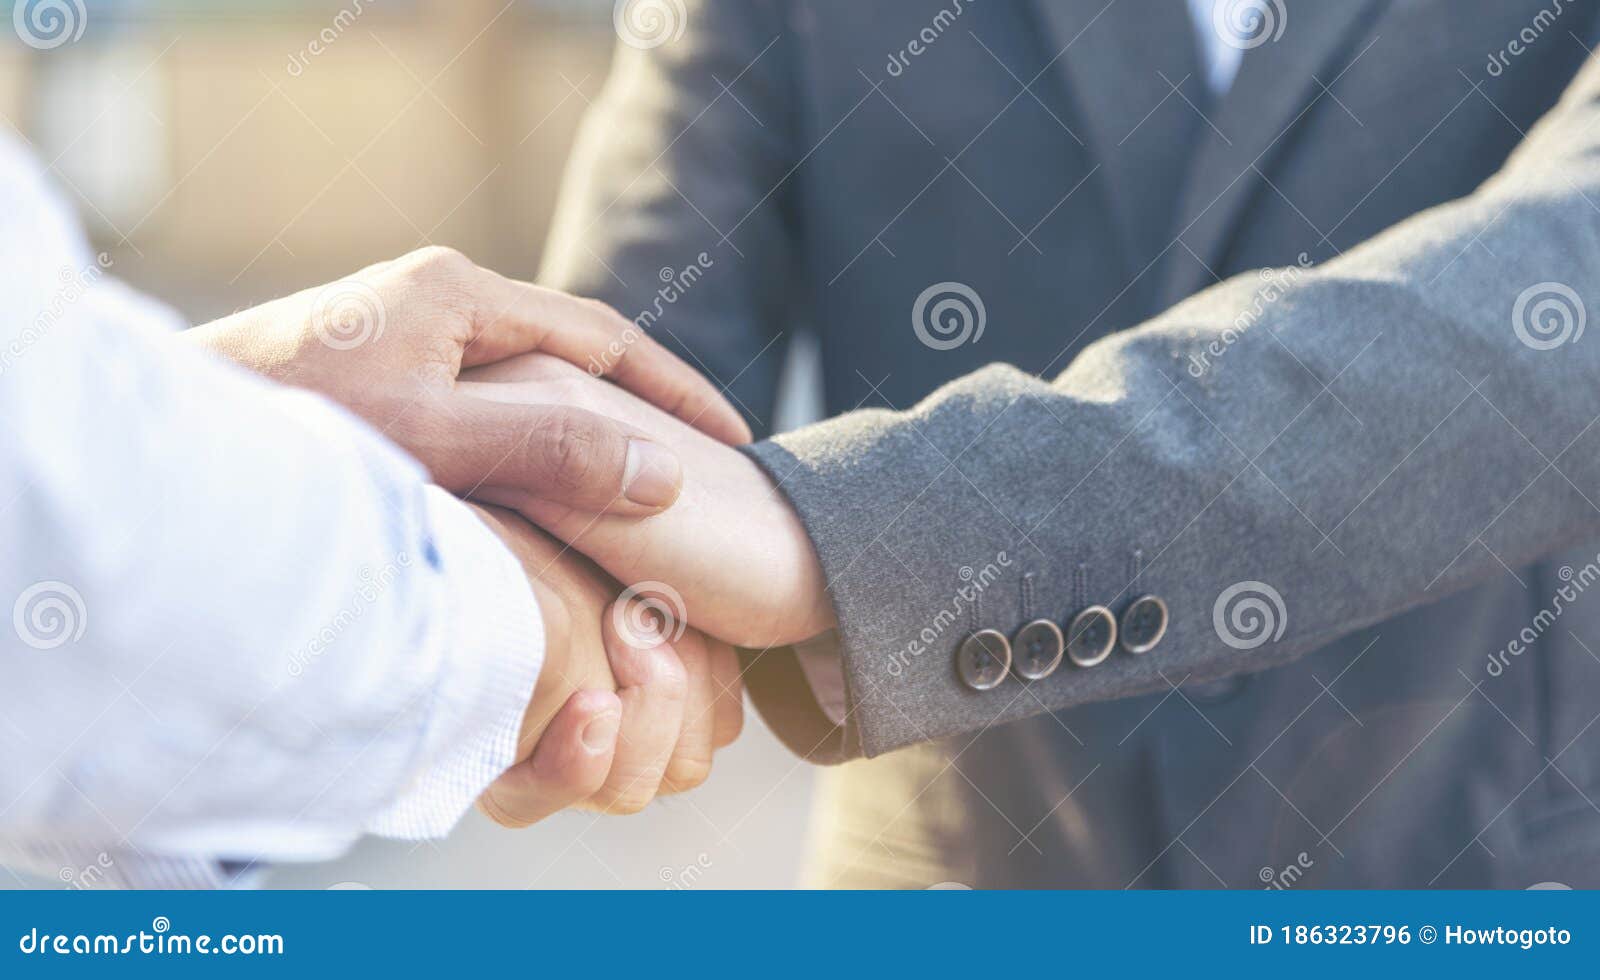 trust promise concept. honest lawyer partner with professional team make law business agreement after complete deal. ethics